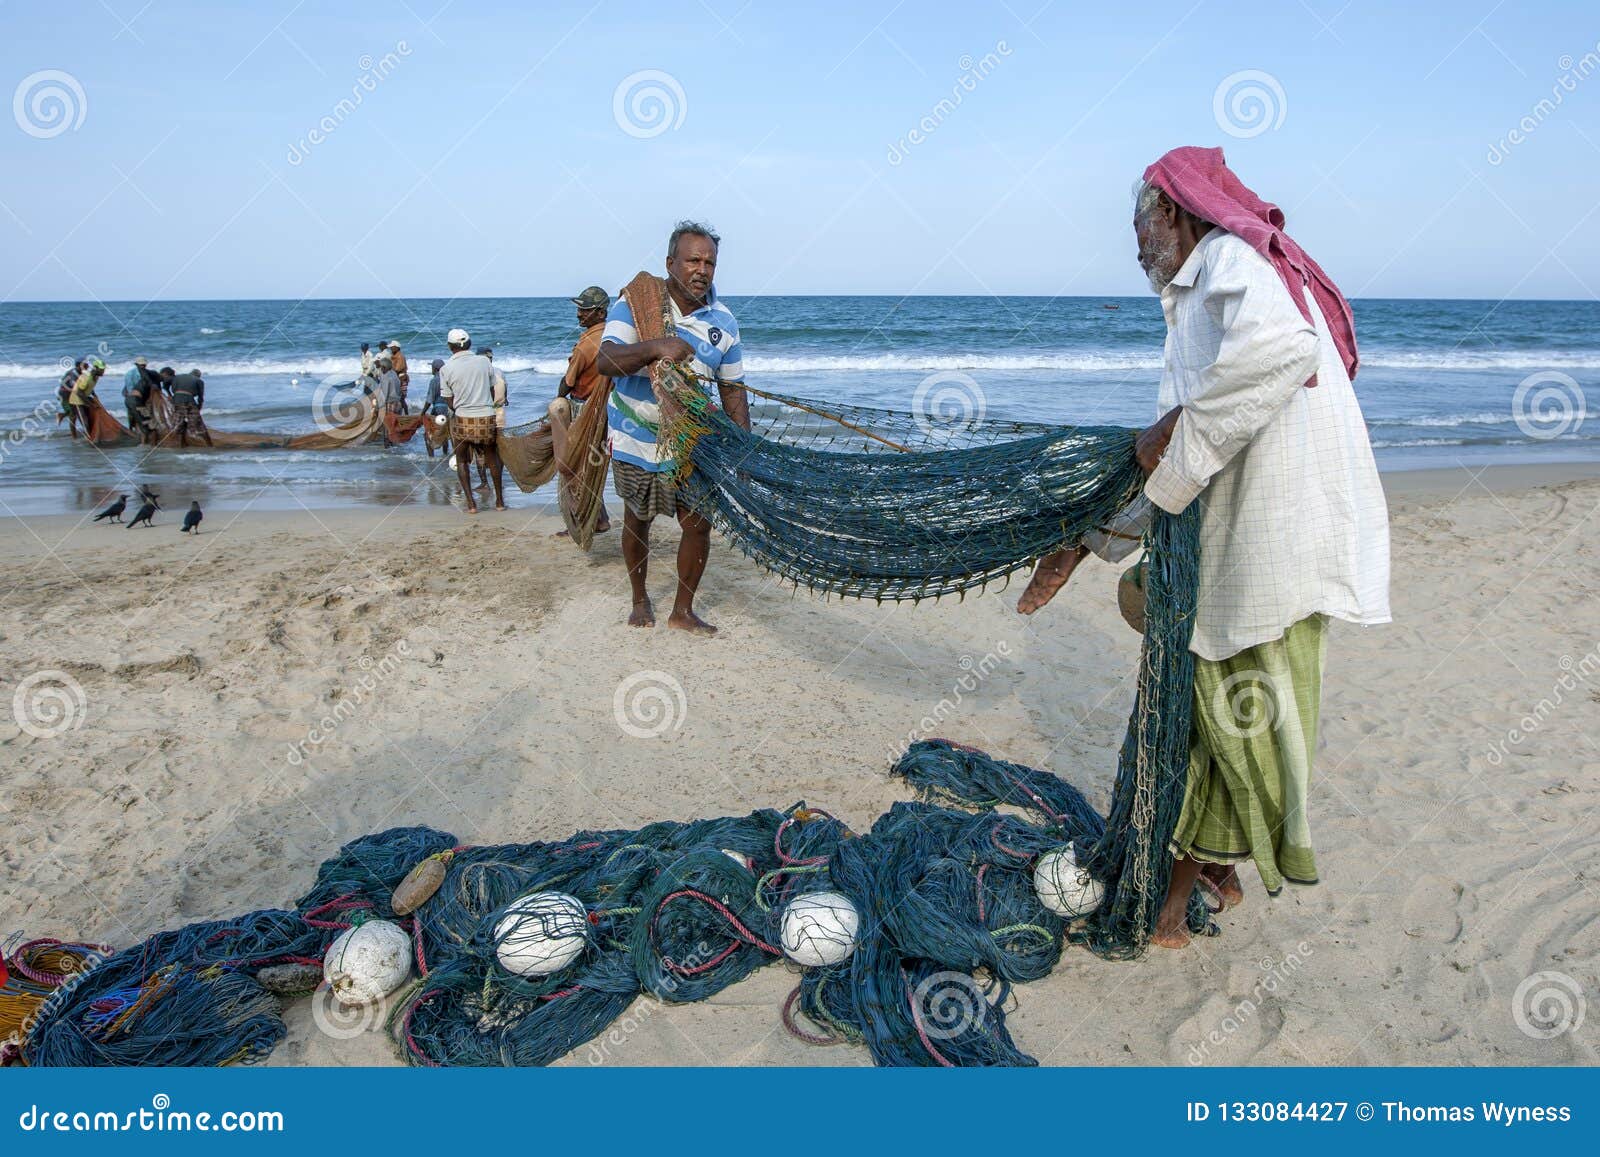 Fishermen Drag a Large Fishing Net Onto the Beach. Editorial Photography -  Image of late, drag: 133084427